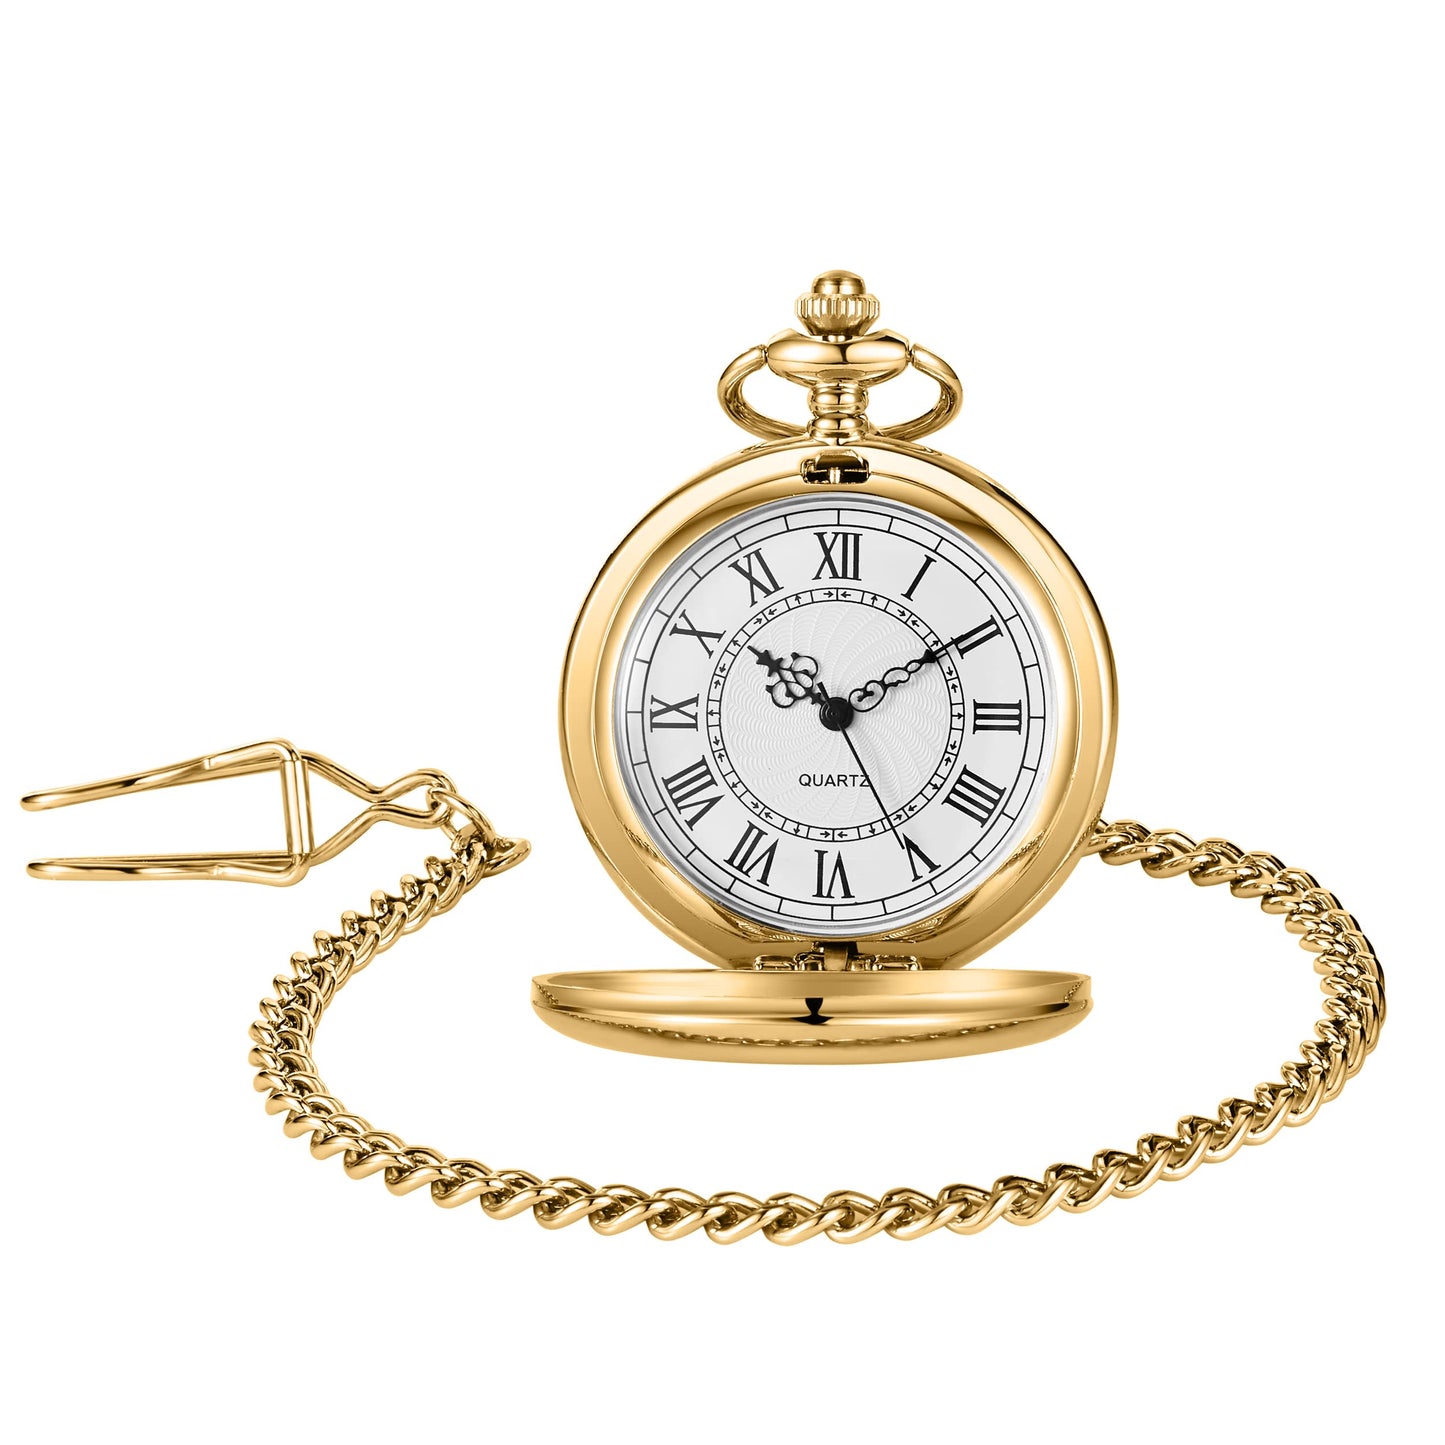 ZIBUYU  Pocket Watch with Chain for Men Antique Retro Style Alloy Pocket Watch Special Birthday Gift for Husb 4.6 CM Diameter -Golden